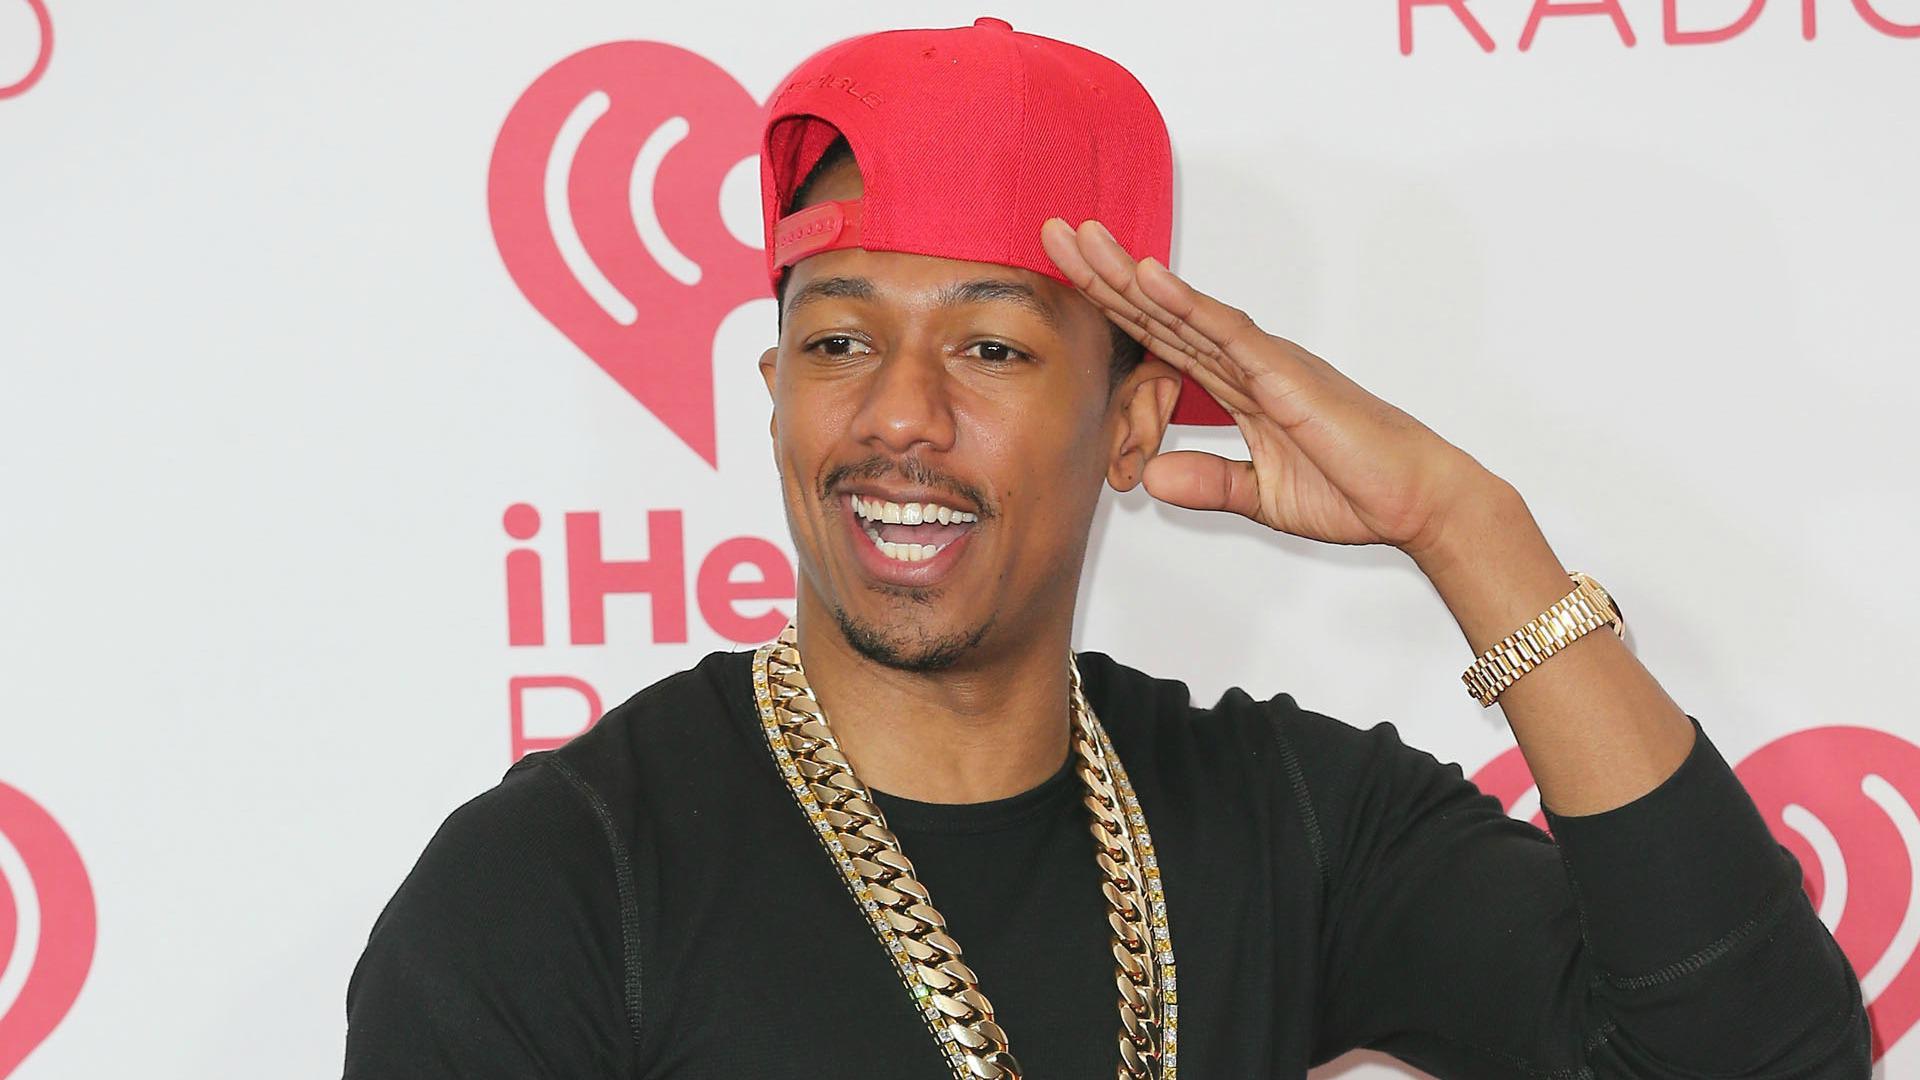 Nick Cannon Wallpaper Image Photo Picture Background